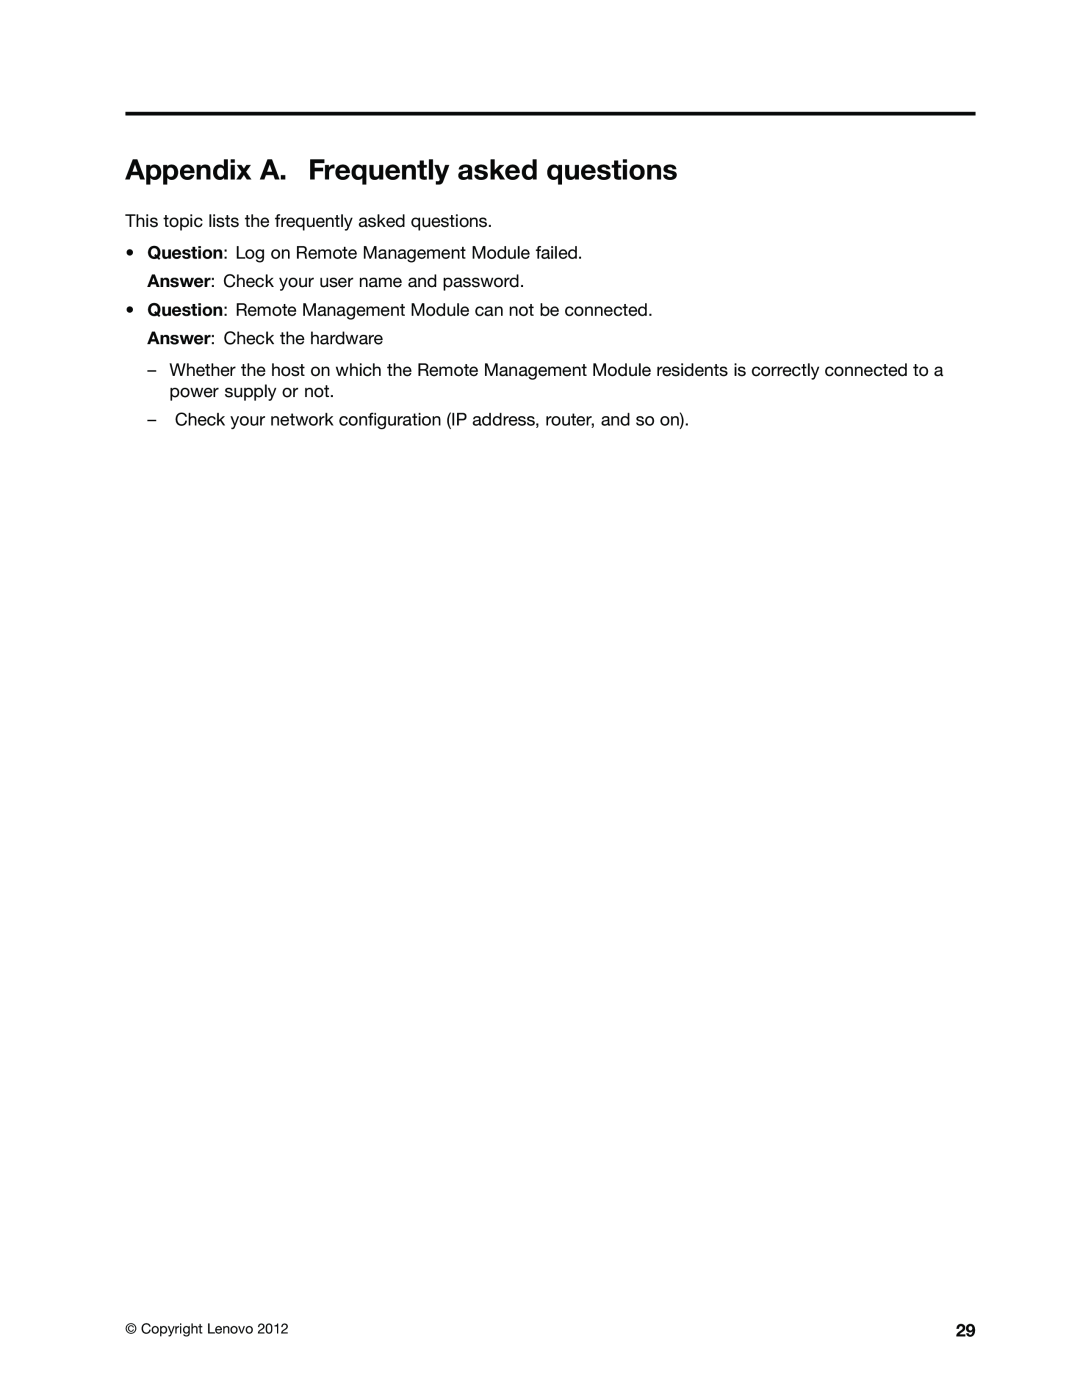 Lenovo RD630, RD330, RD530 manual Appendix A. Frequently asked questions 